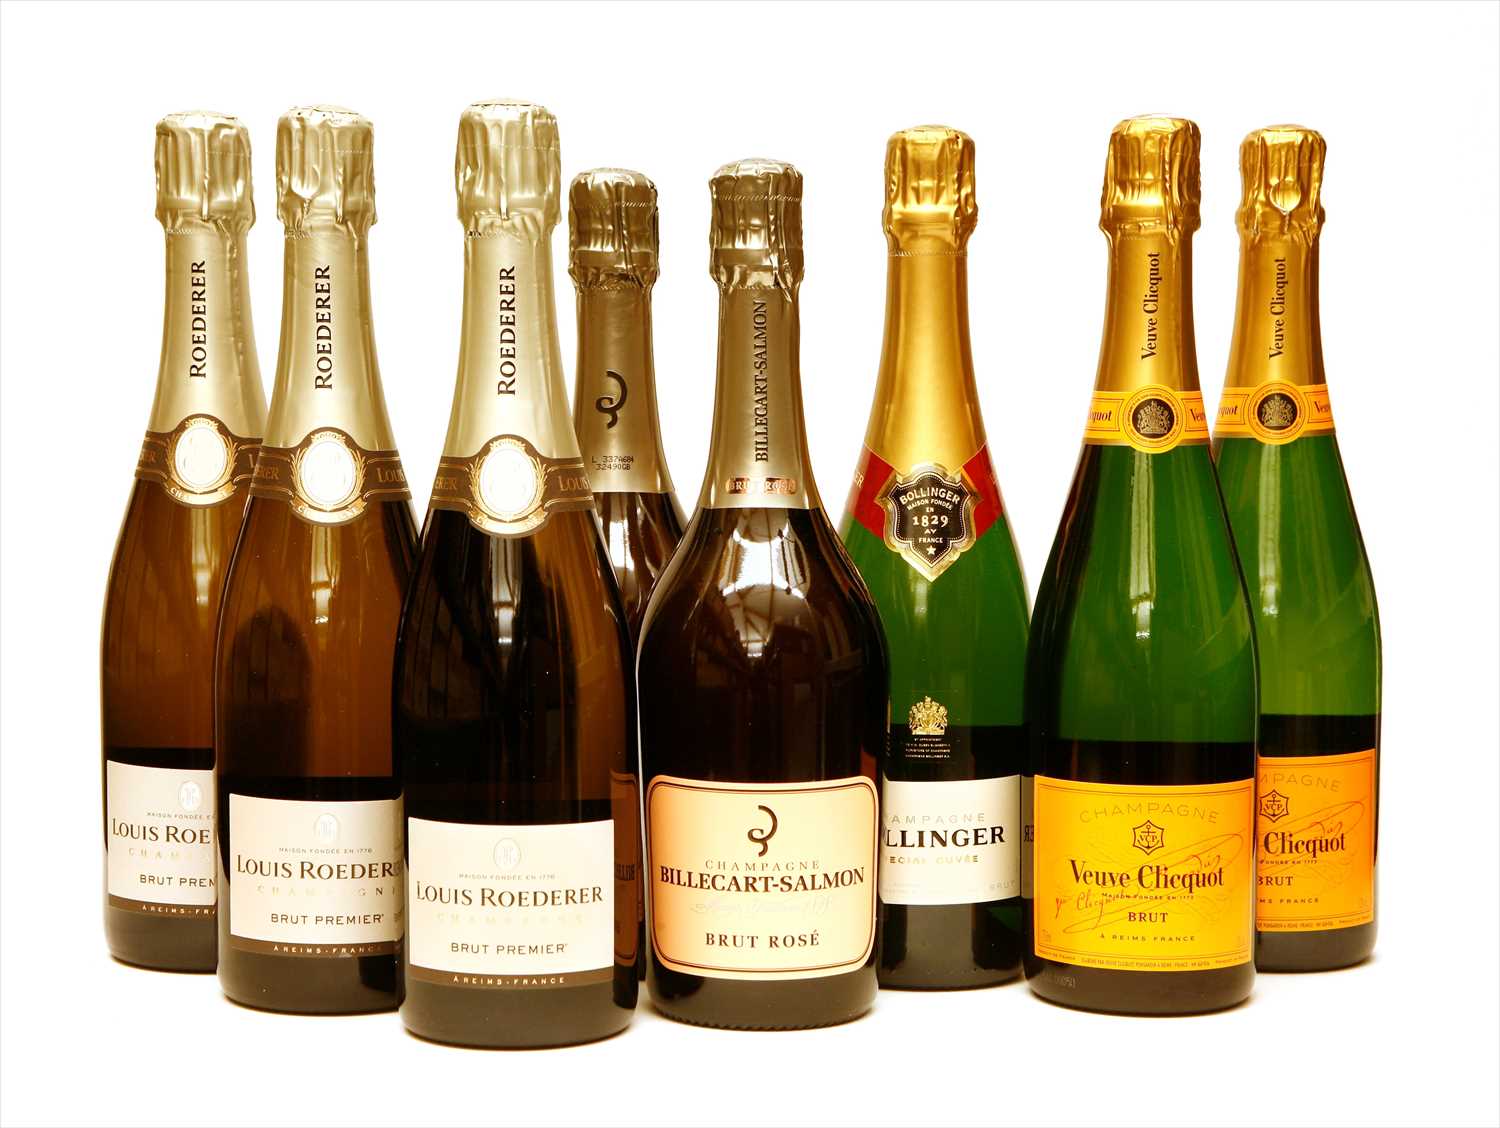 Assorted: Louis Roederer, Bollinger, Billicart-Salmon and Veuve Clicquot, eight bottles in total